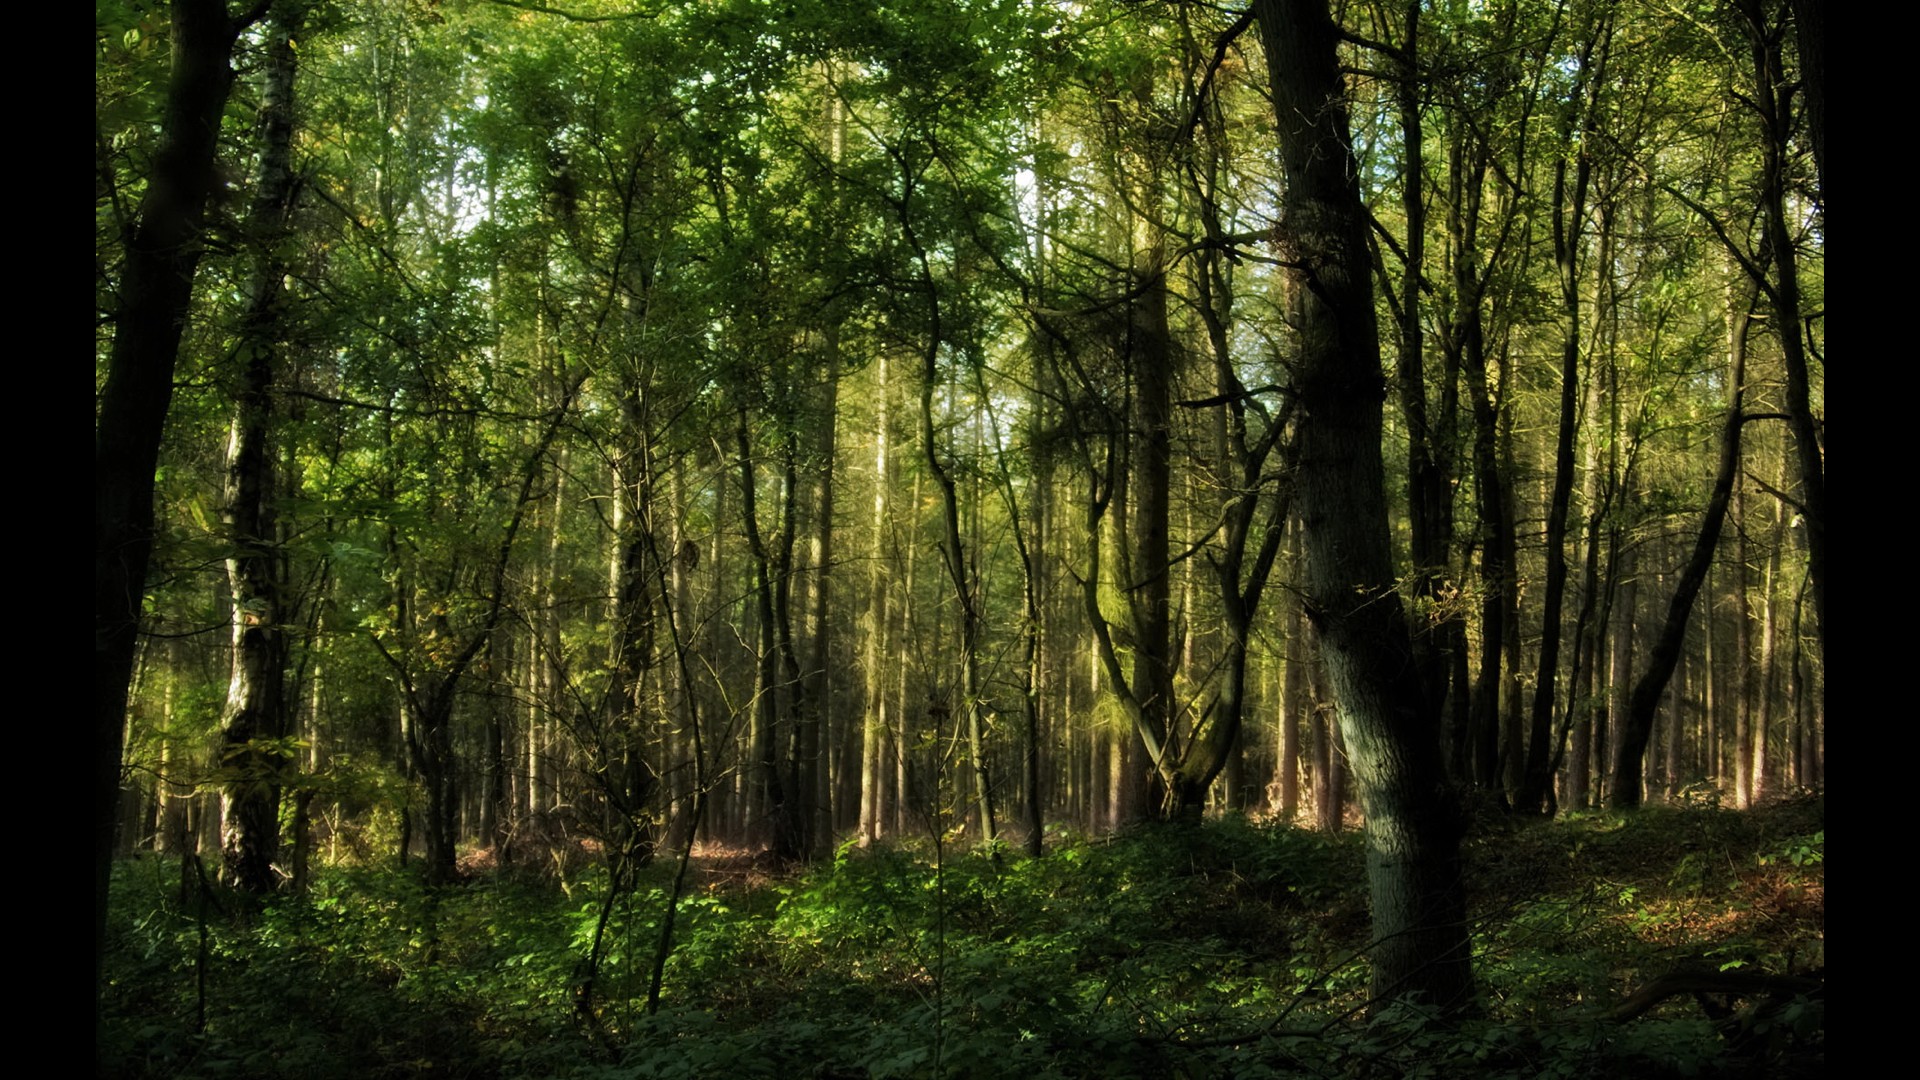 A forest filled with very leafy and green trees that fill the space irregularly.